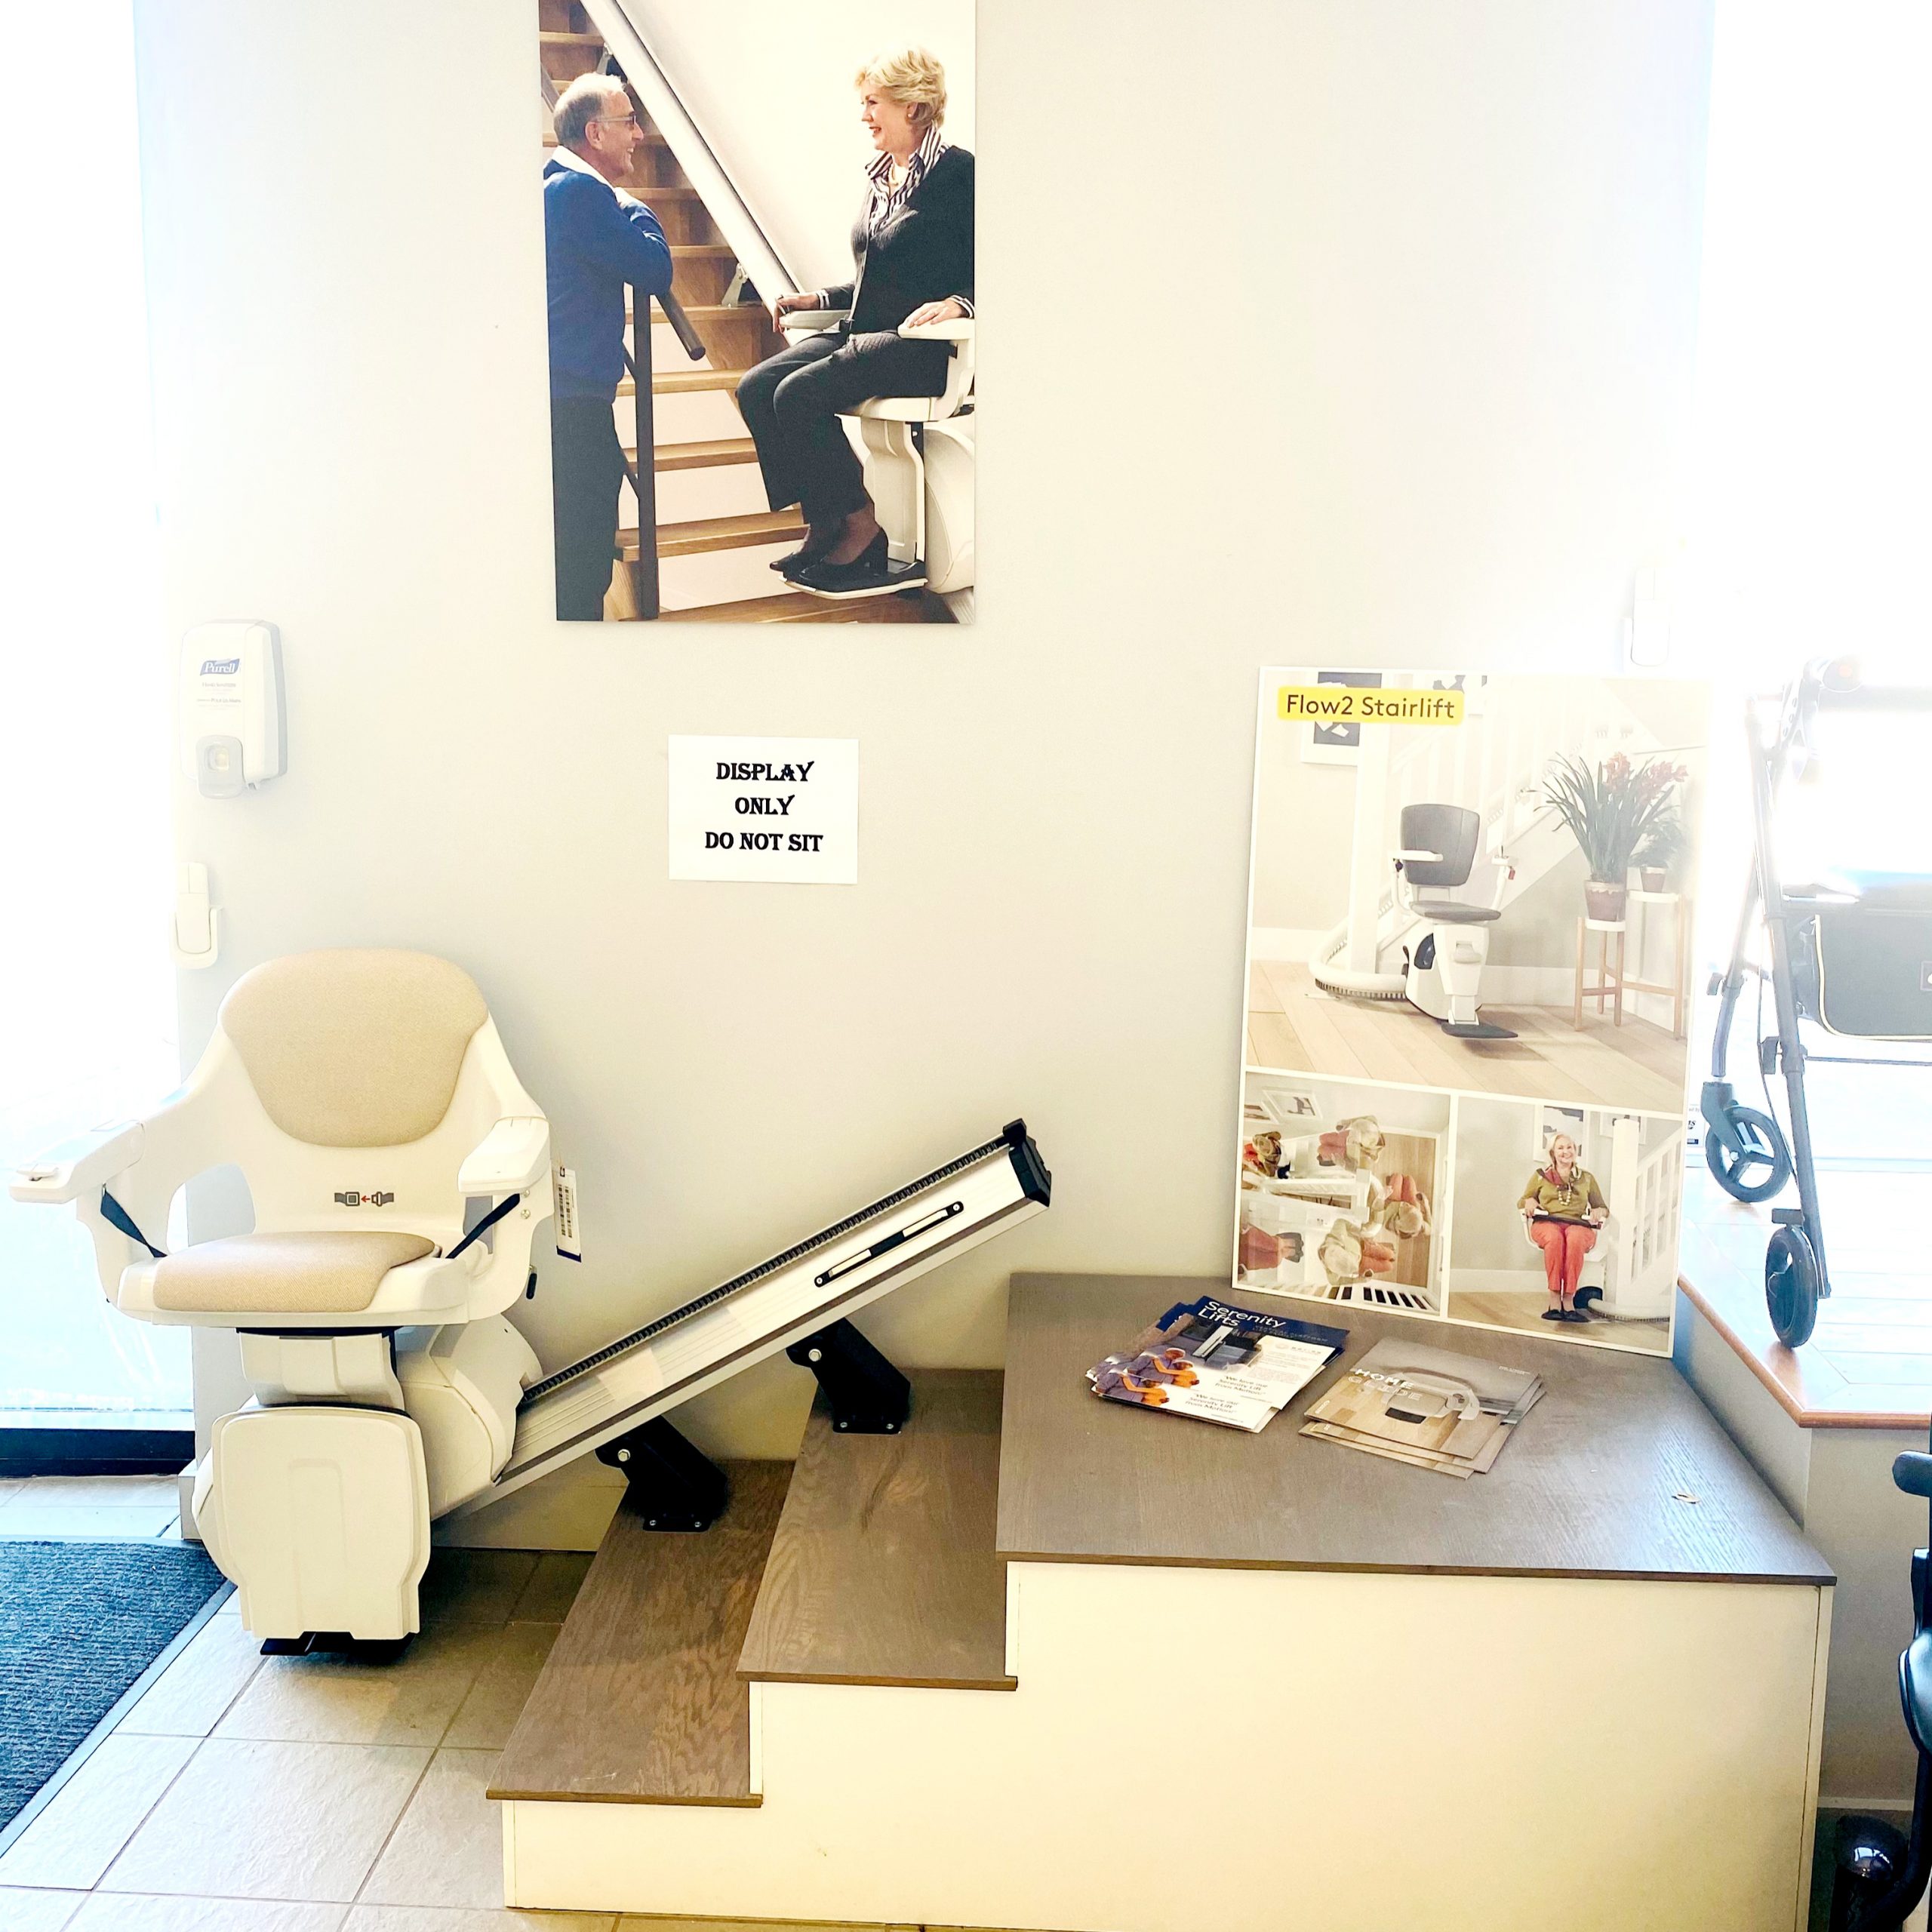 Mississauga stairlift display in showroom